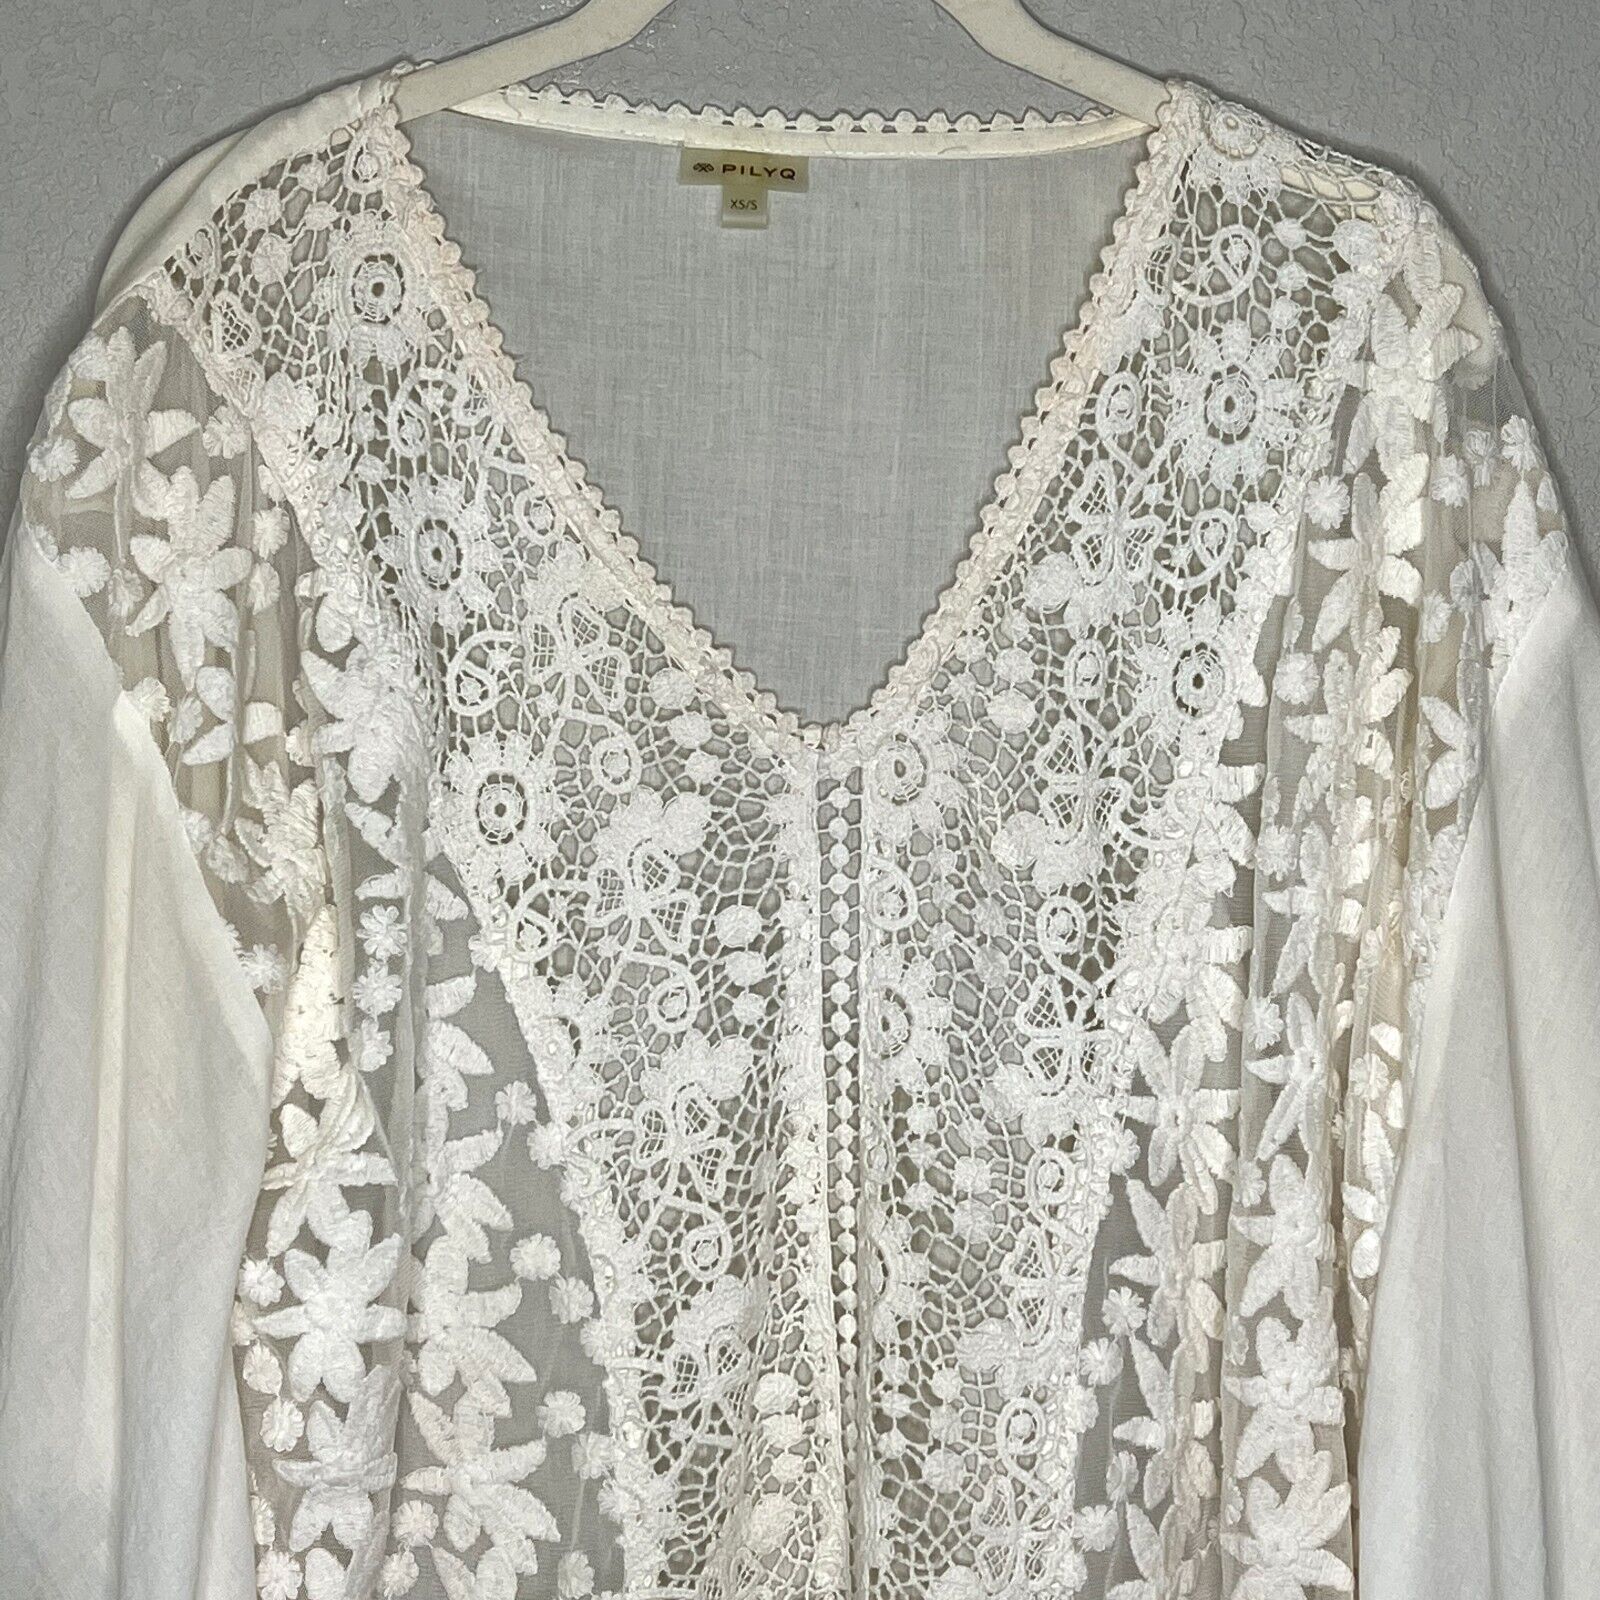 PilyQ Ivory Floral Lace Crochet Sheer Tassel Swim Cover Up Size XS/S